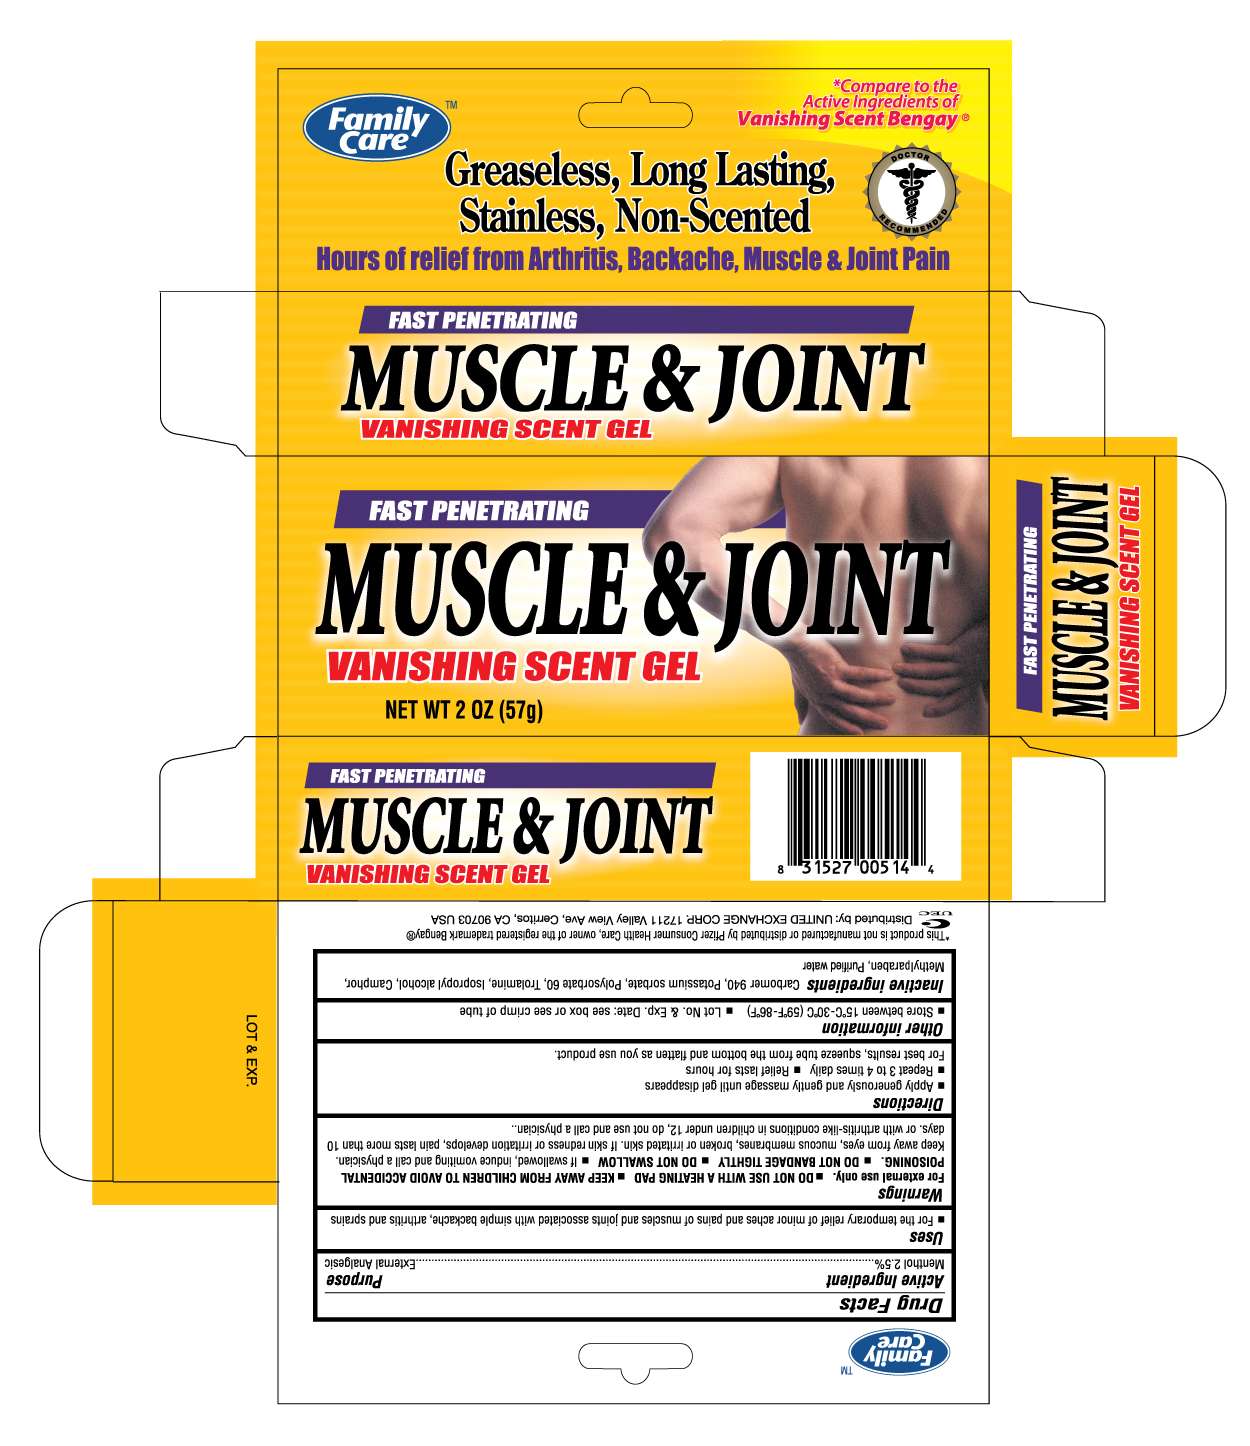 FAMILY CARE MUSCLE AND JOINT VANISHING SCENT